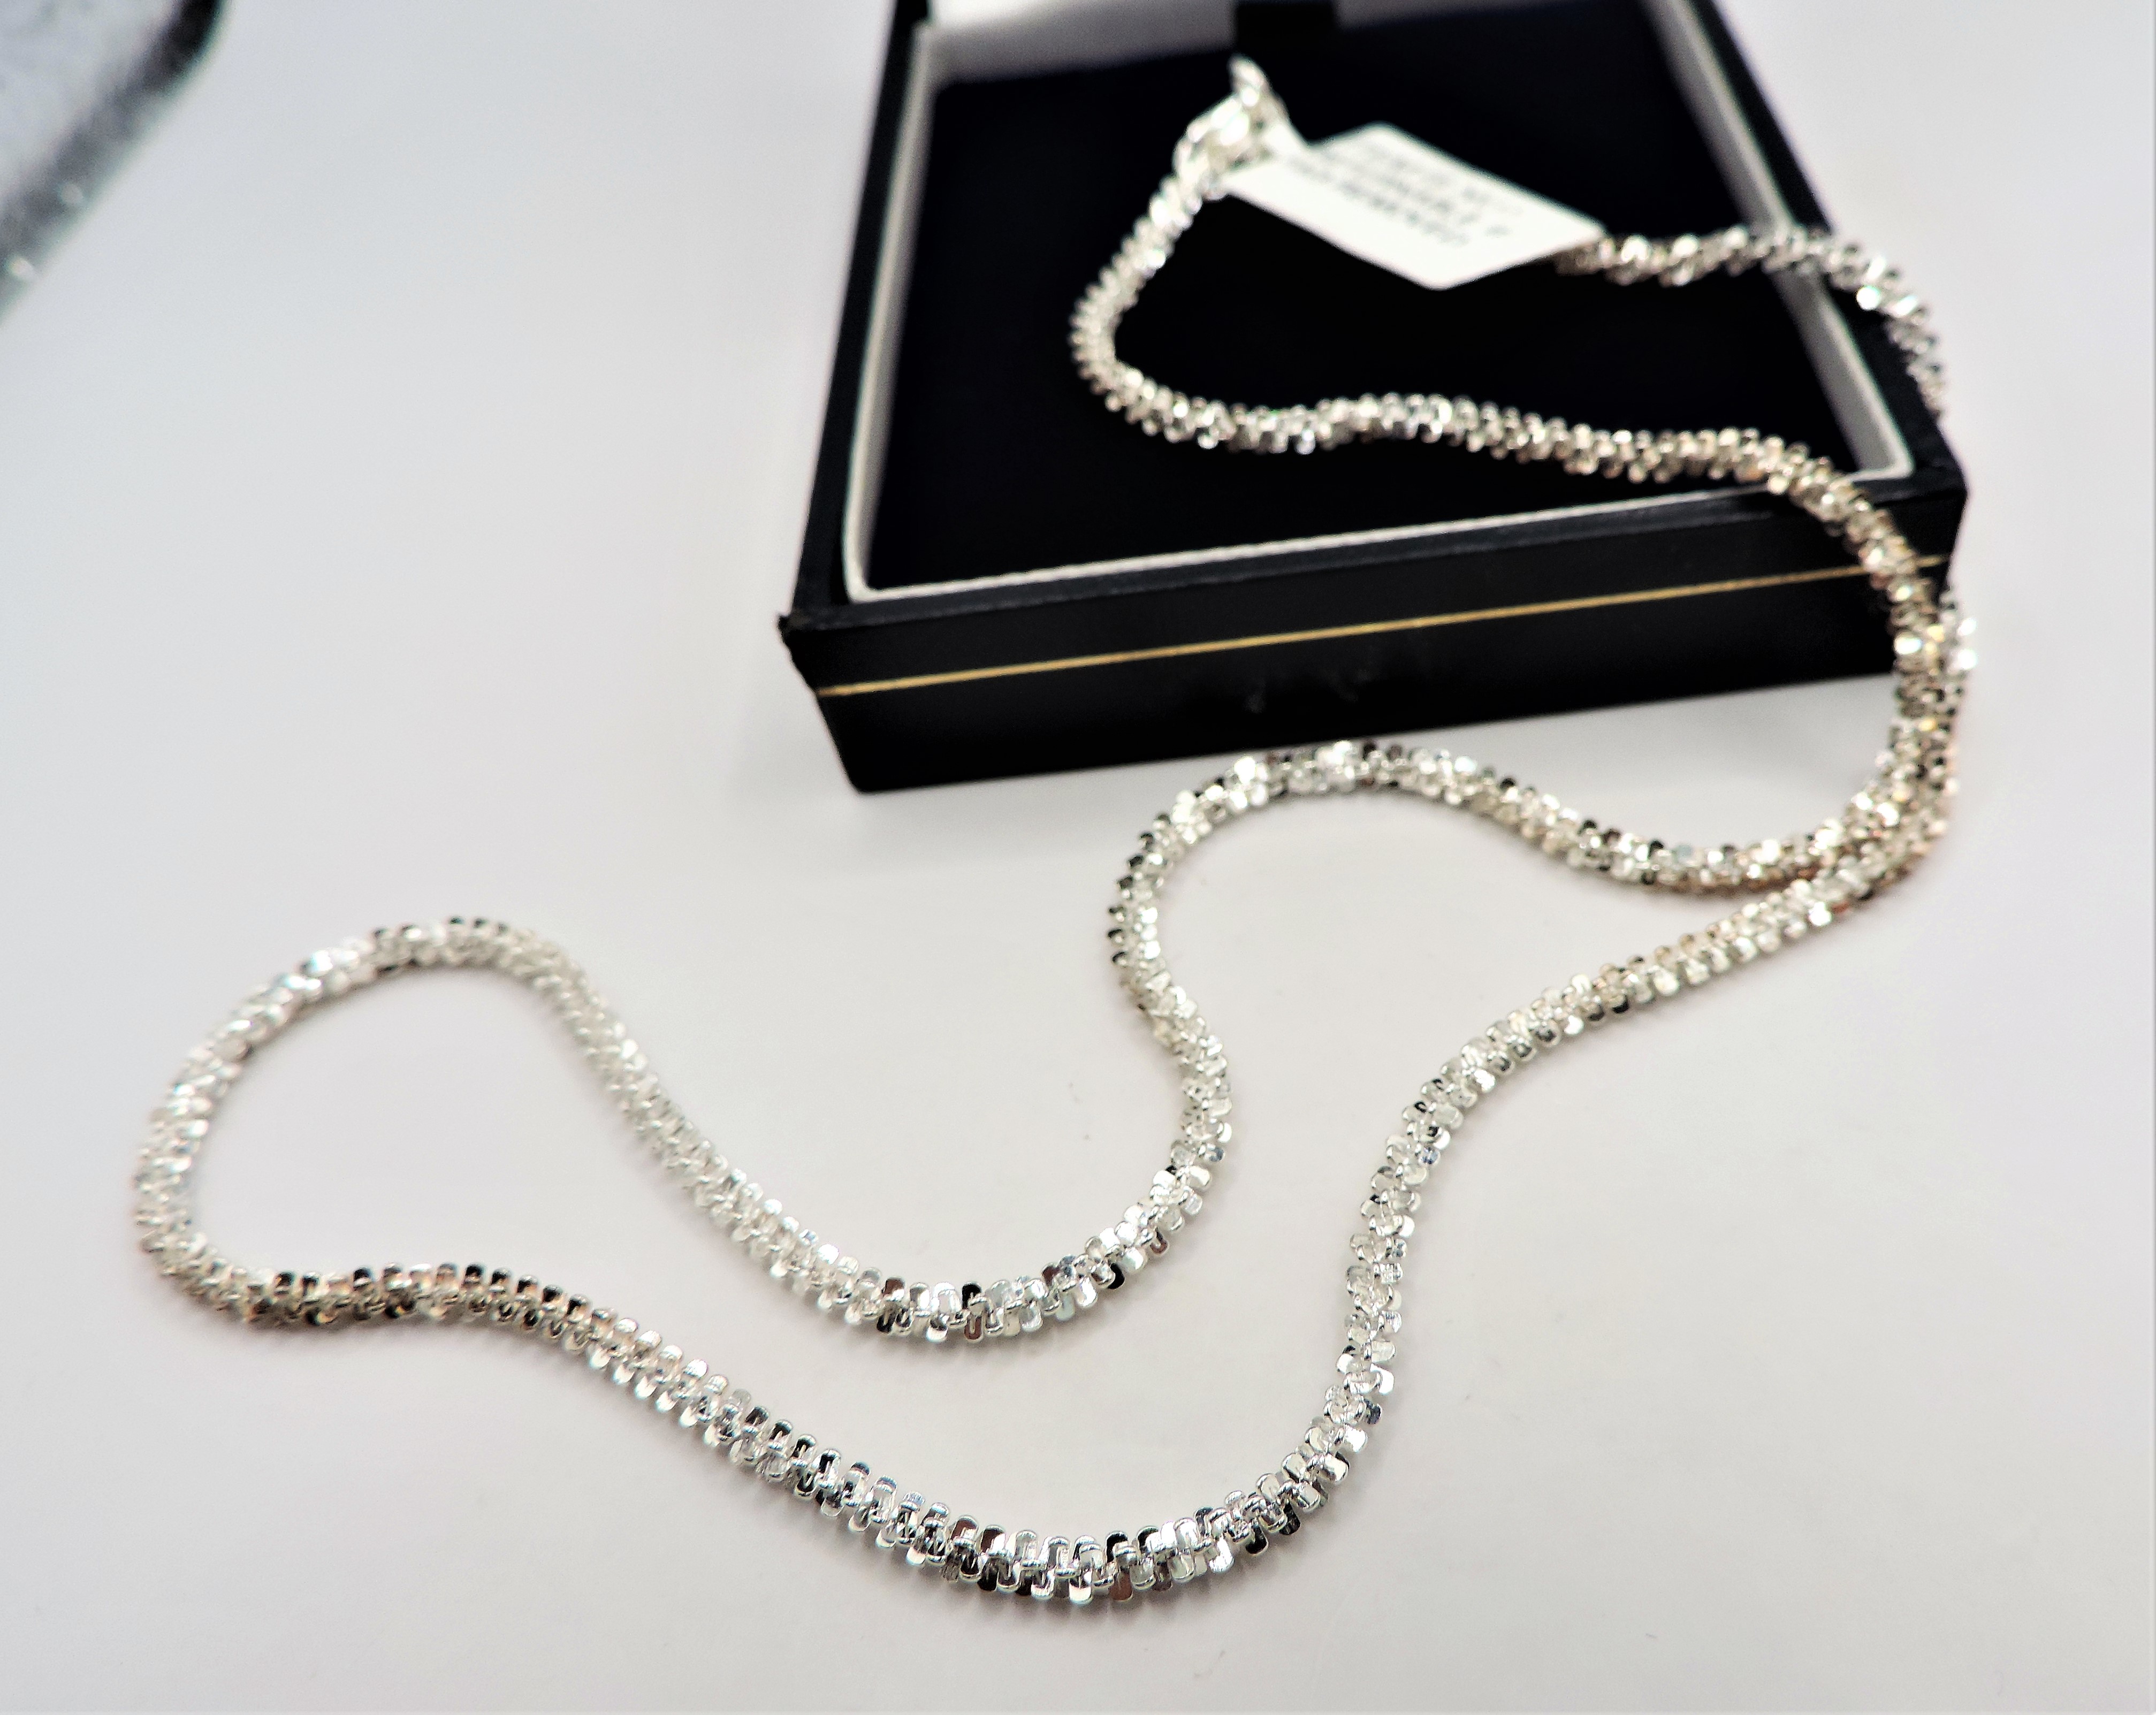 Italian 925 Sterling Silver 3mm Sparkle Glitter Margarita Twisted Rock Chain - Image 2 of 2